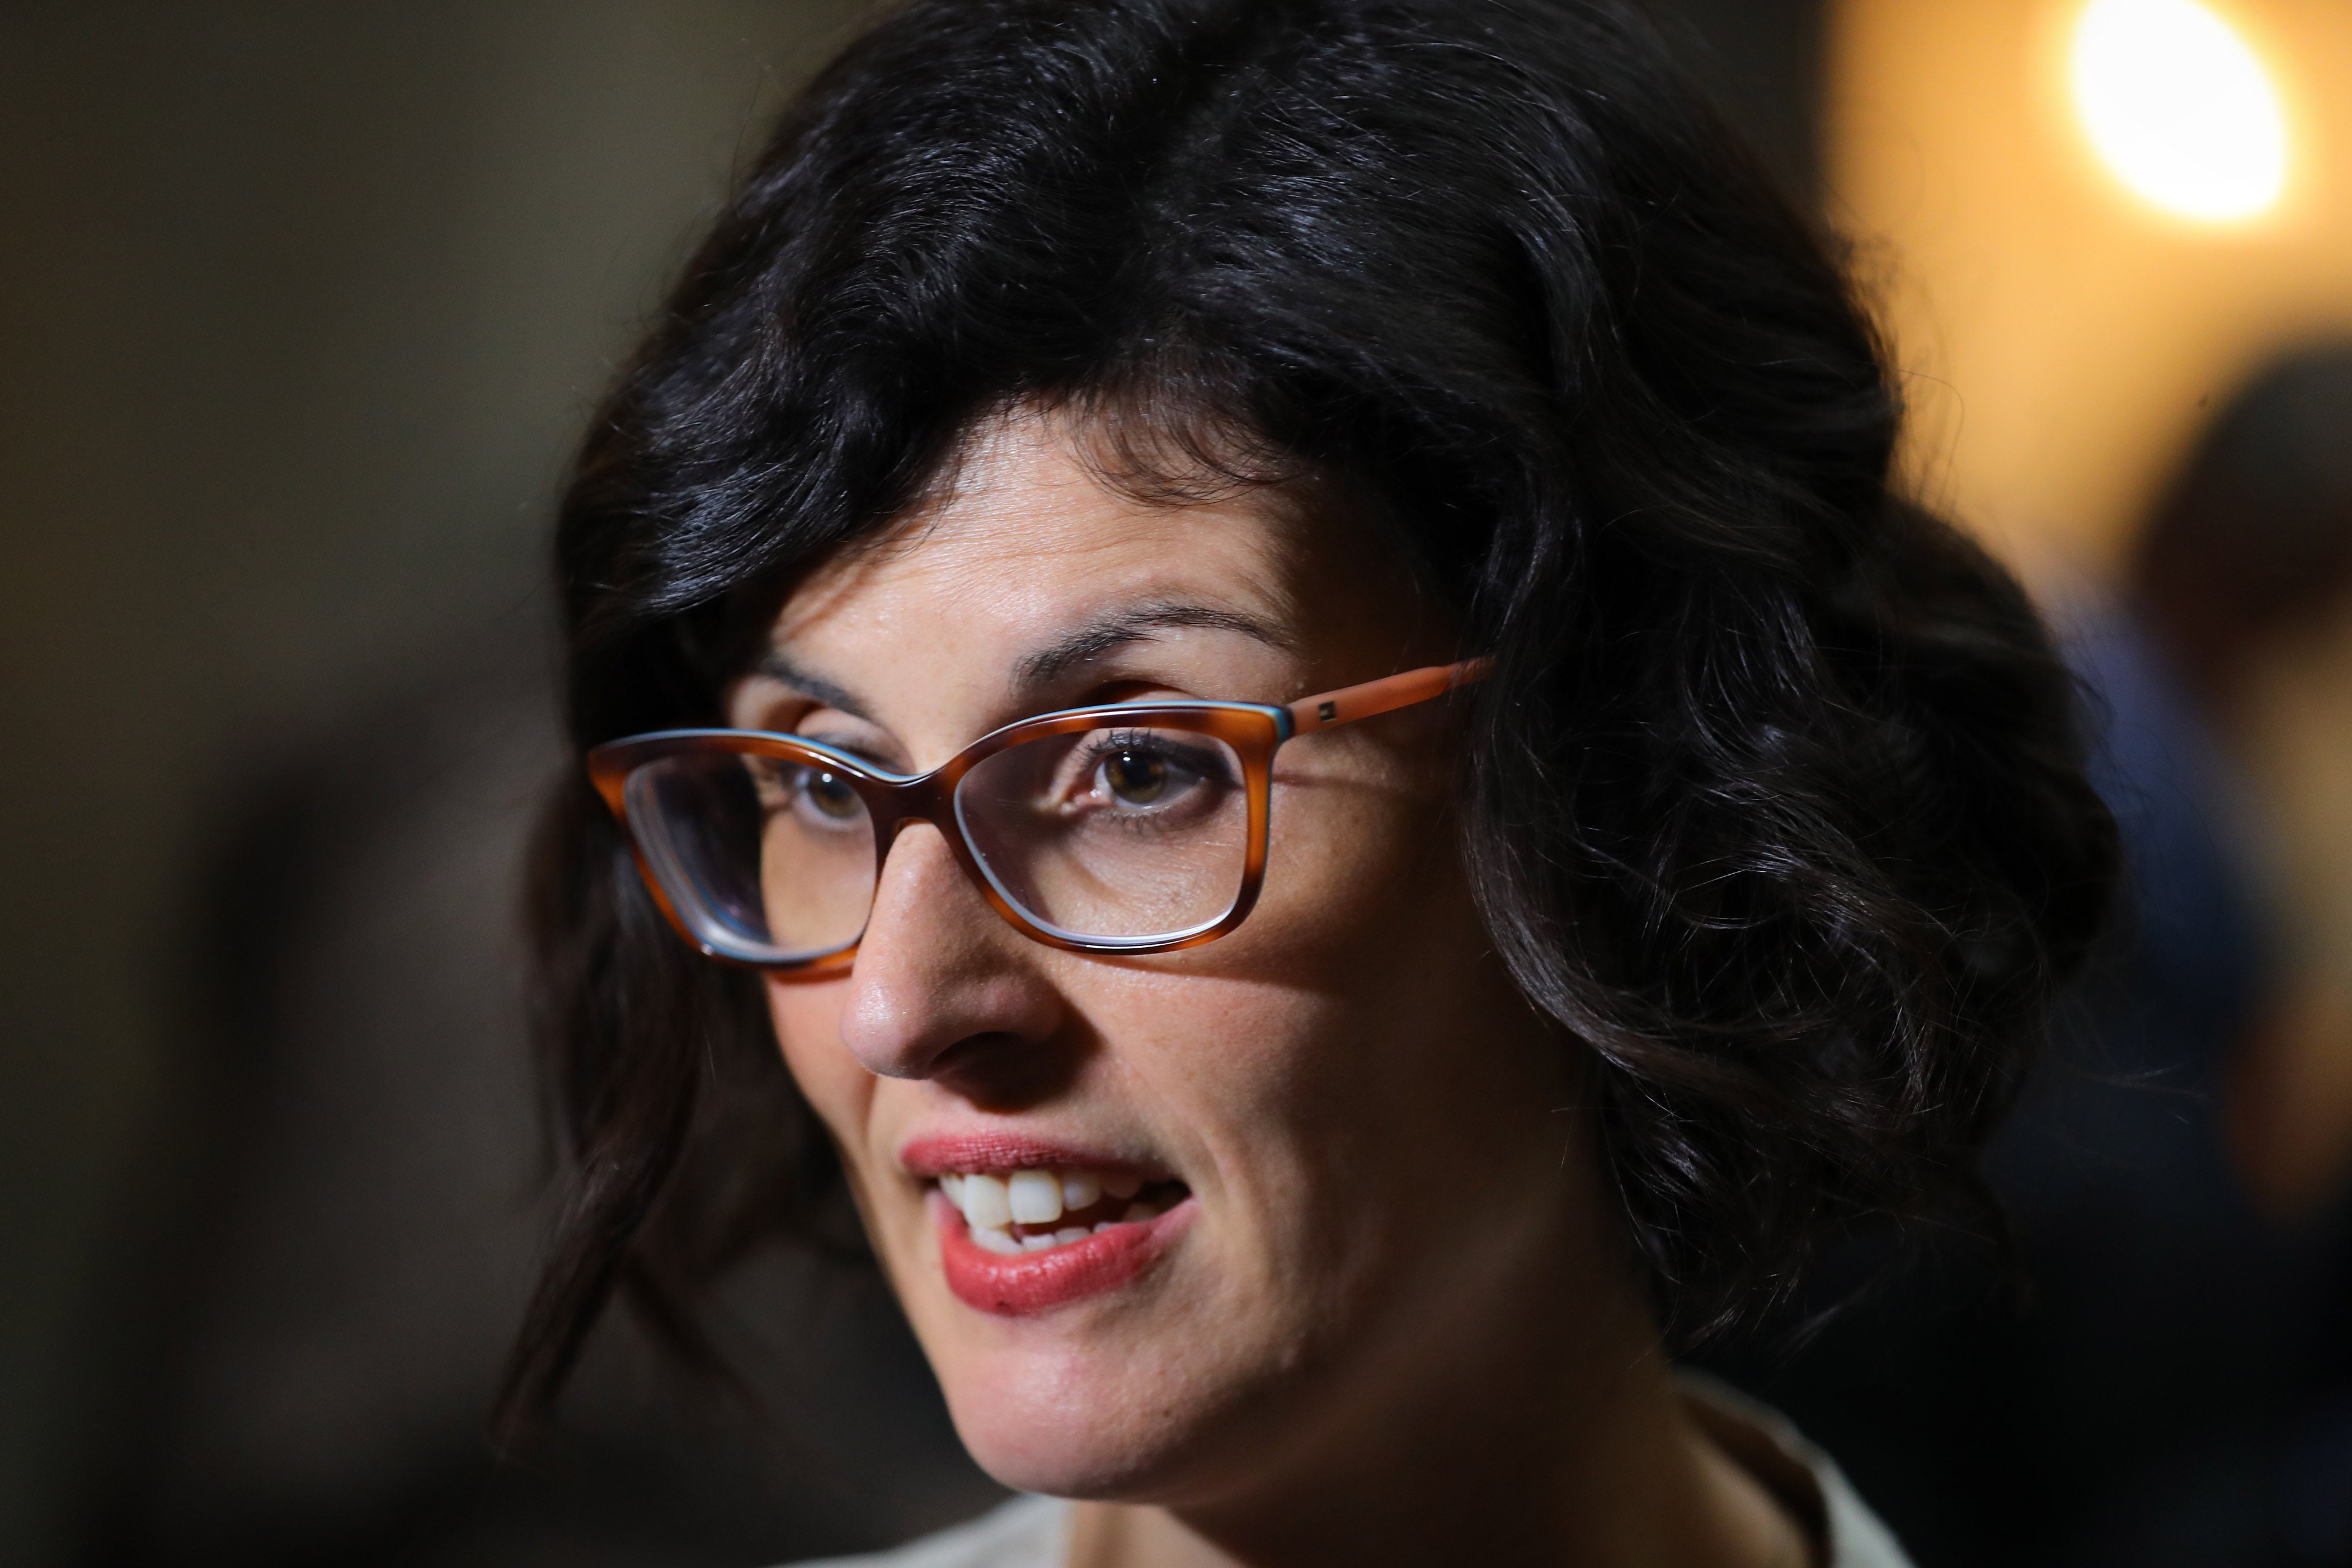 Layla Moran says a male MP offered to help her get ahead in exchange for going for a drink